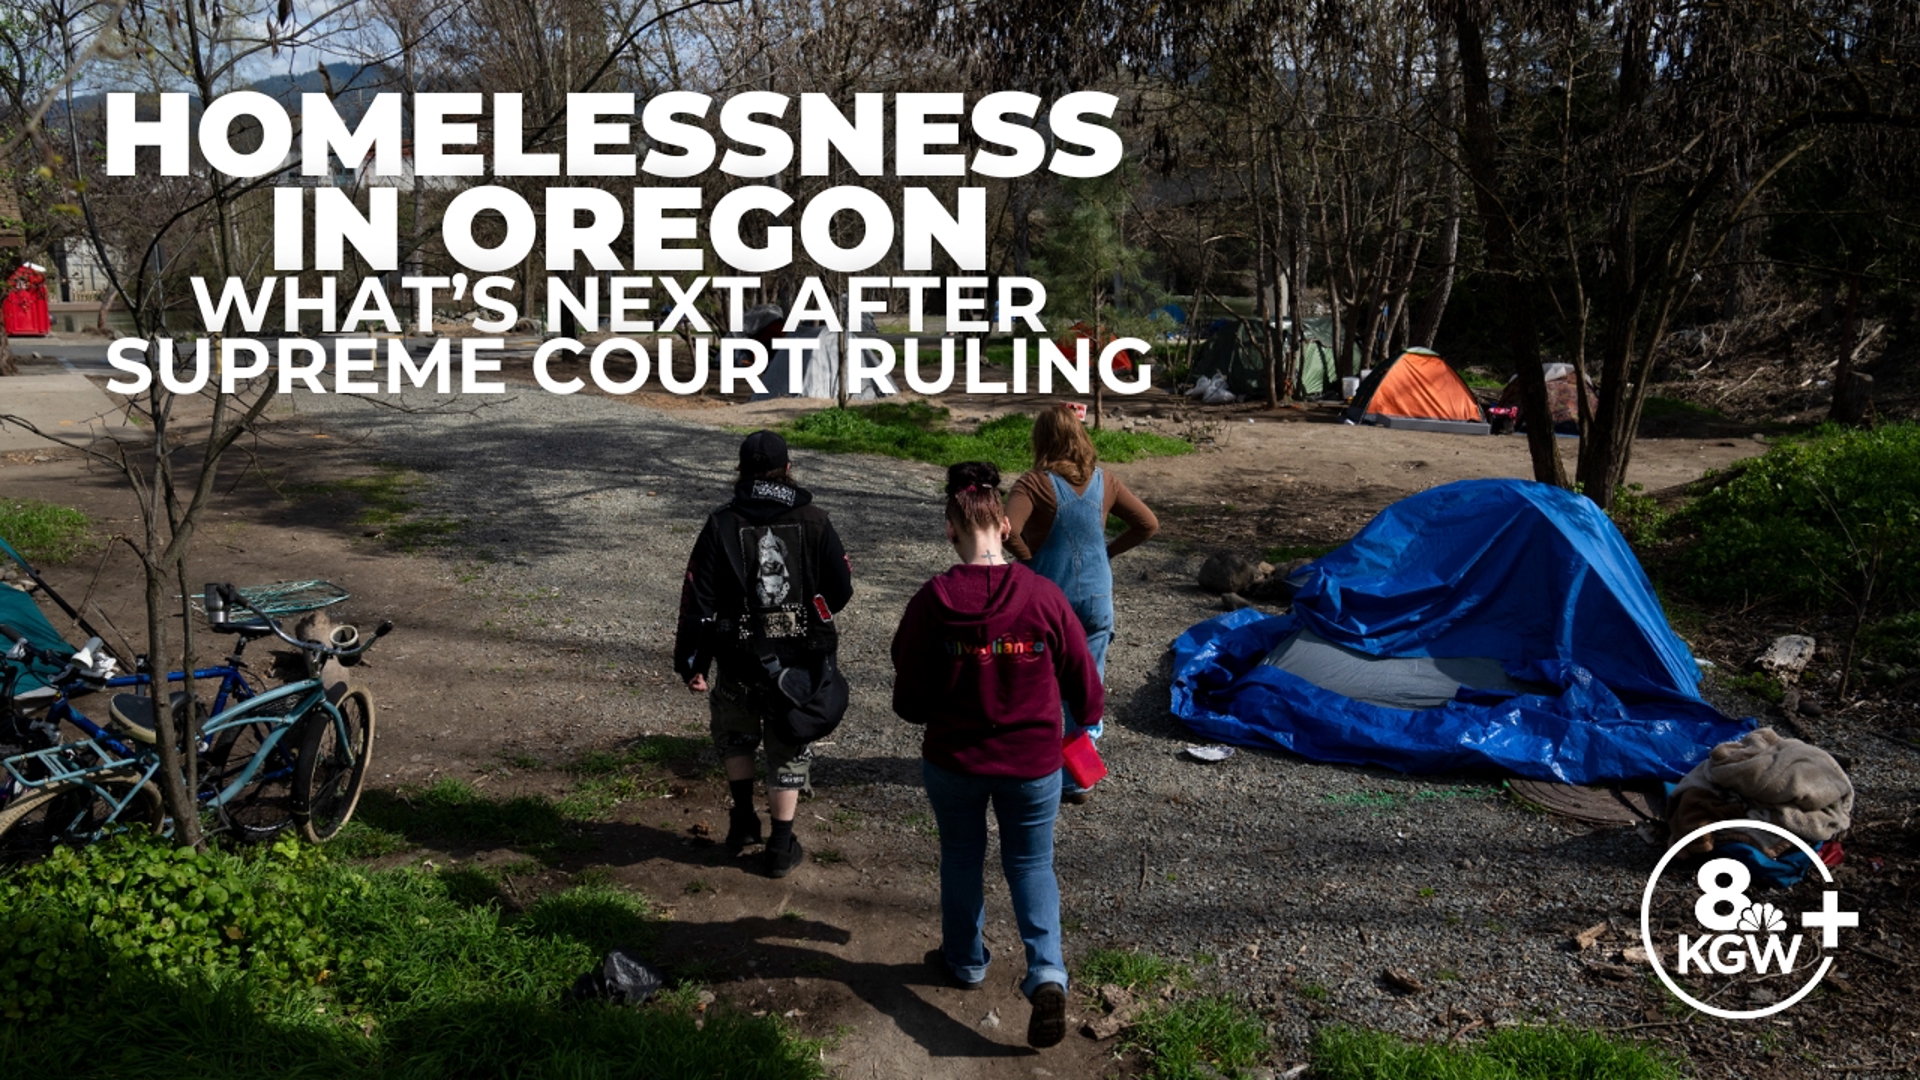 The Supreme Court struck down a prior court ruling that prohibited cities from penalizing people for camping outside, but a similar Oregon state law remains active.